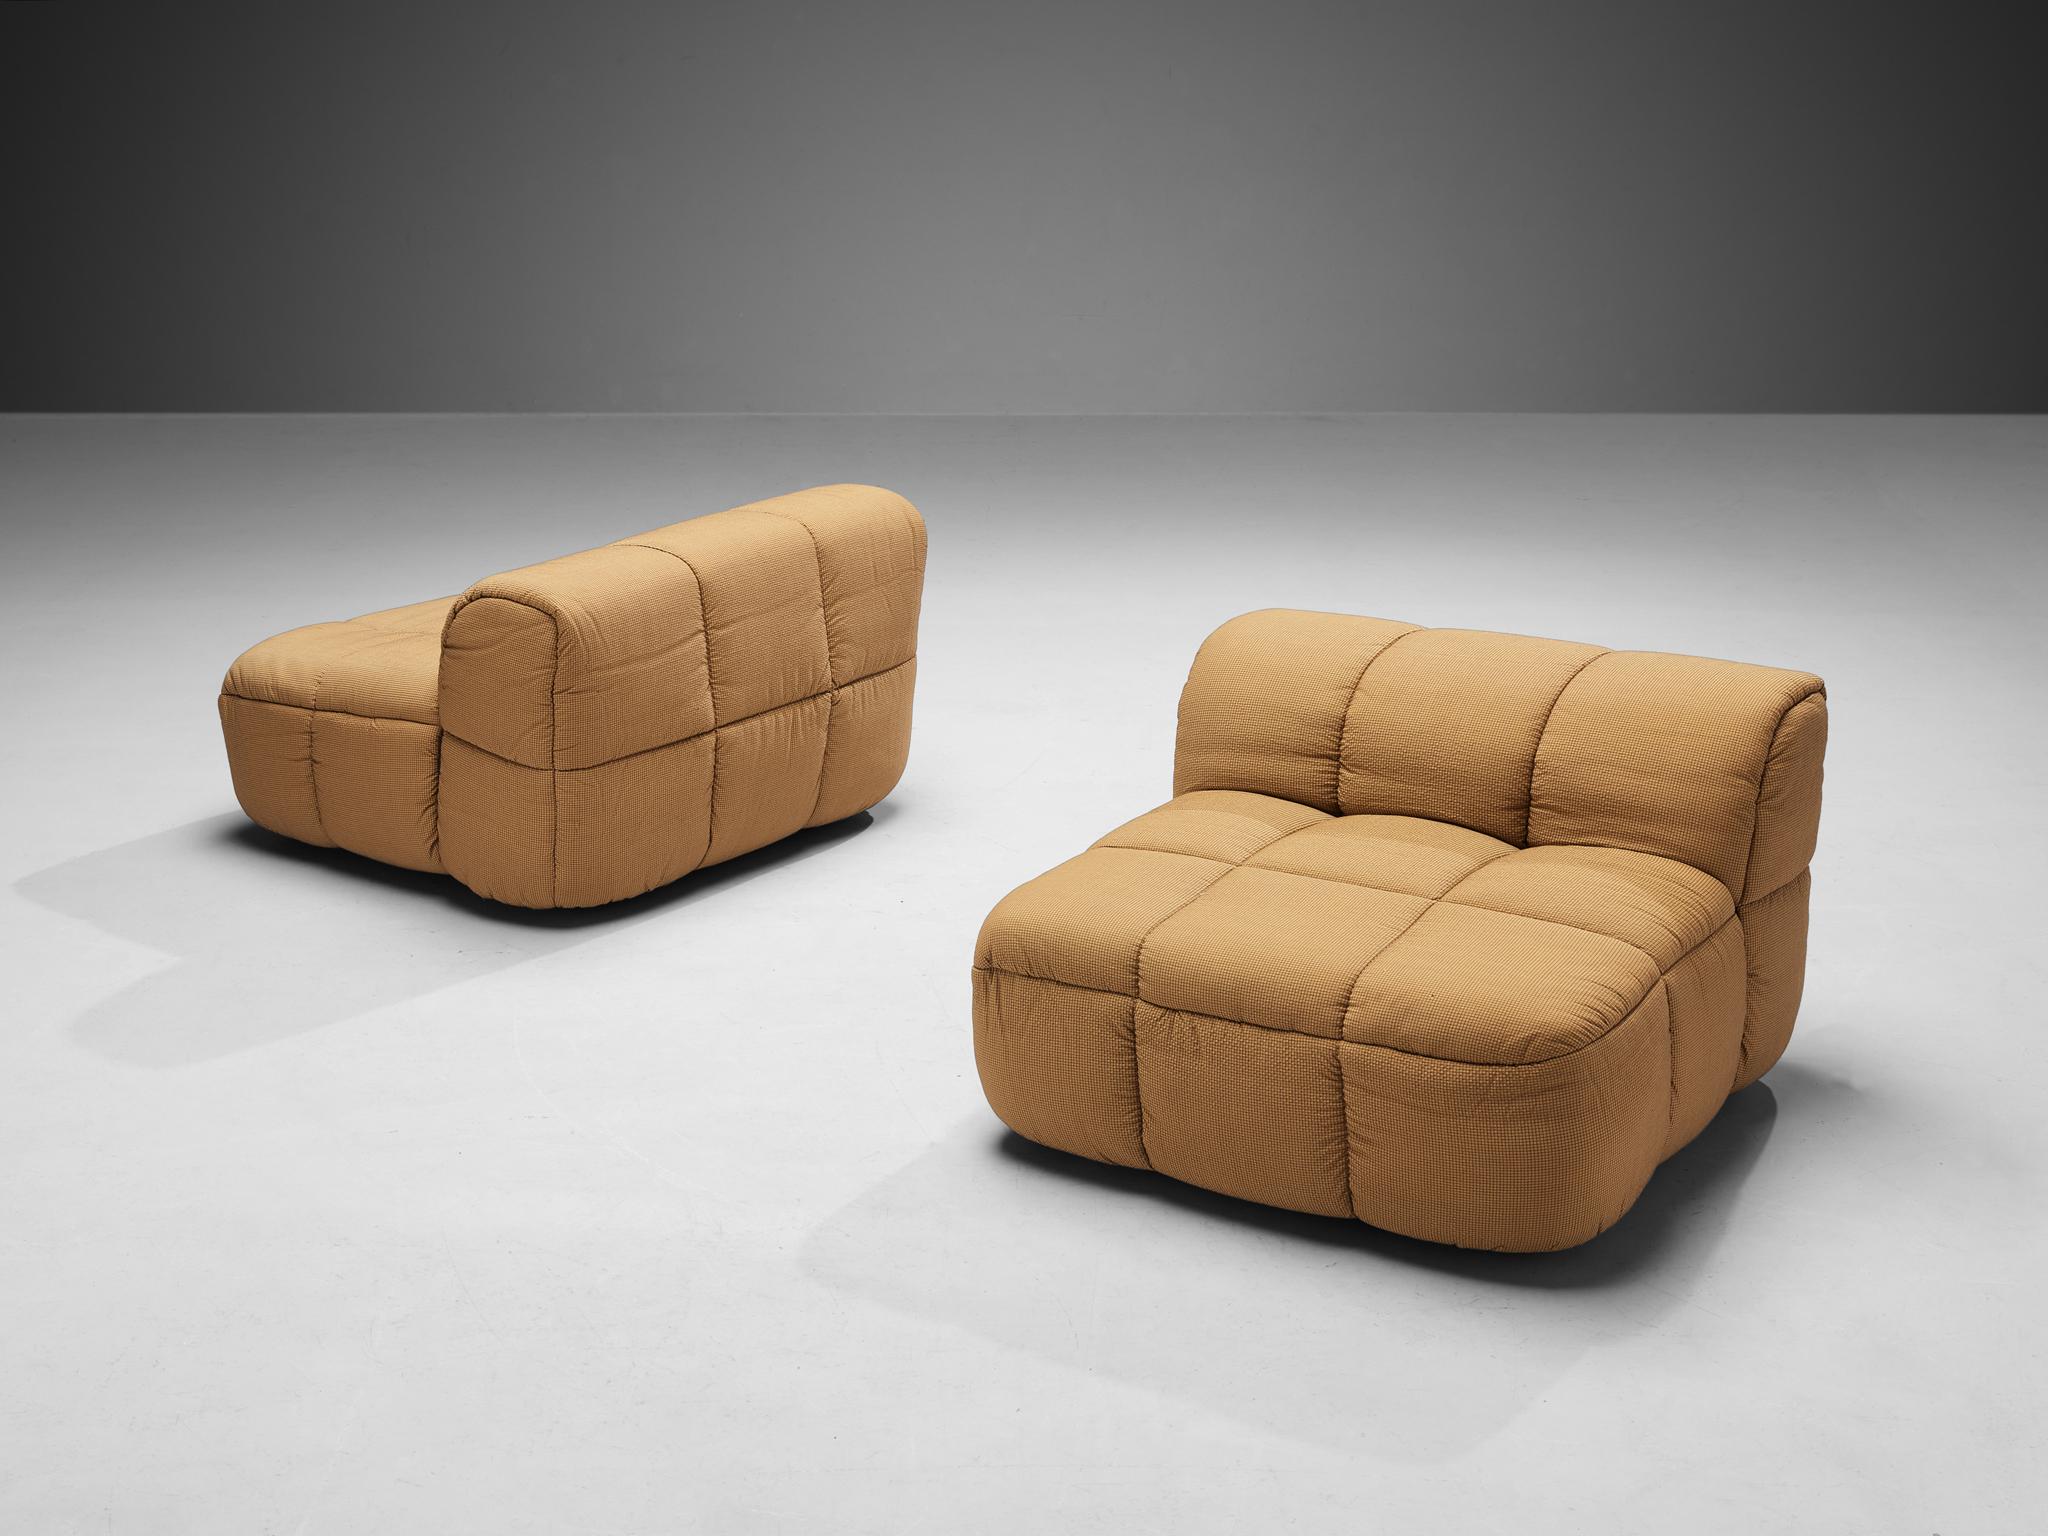 Cini Boeri for Arflex Modular 'Strips' Pair of Two-Seater Elements  For Sale 3